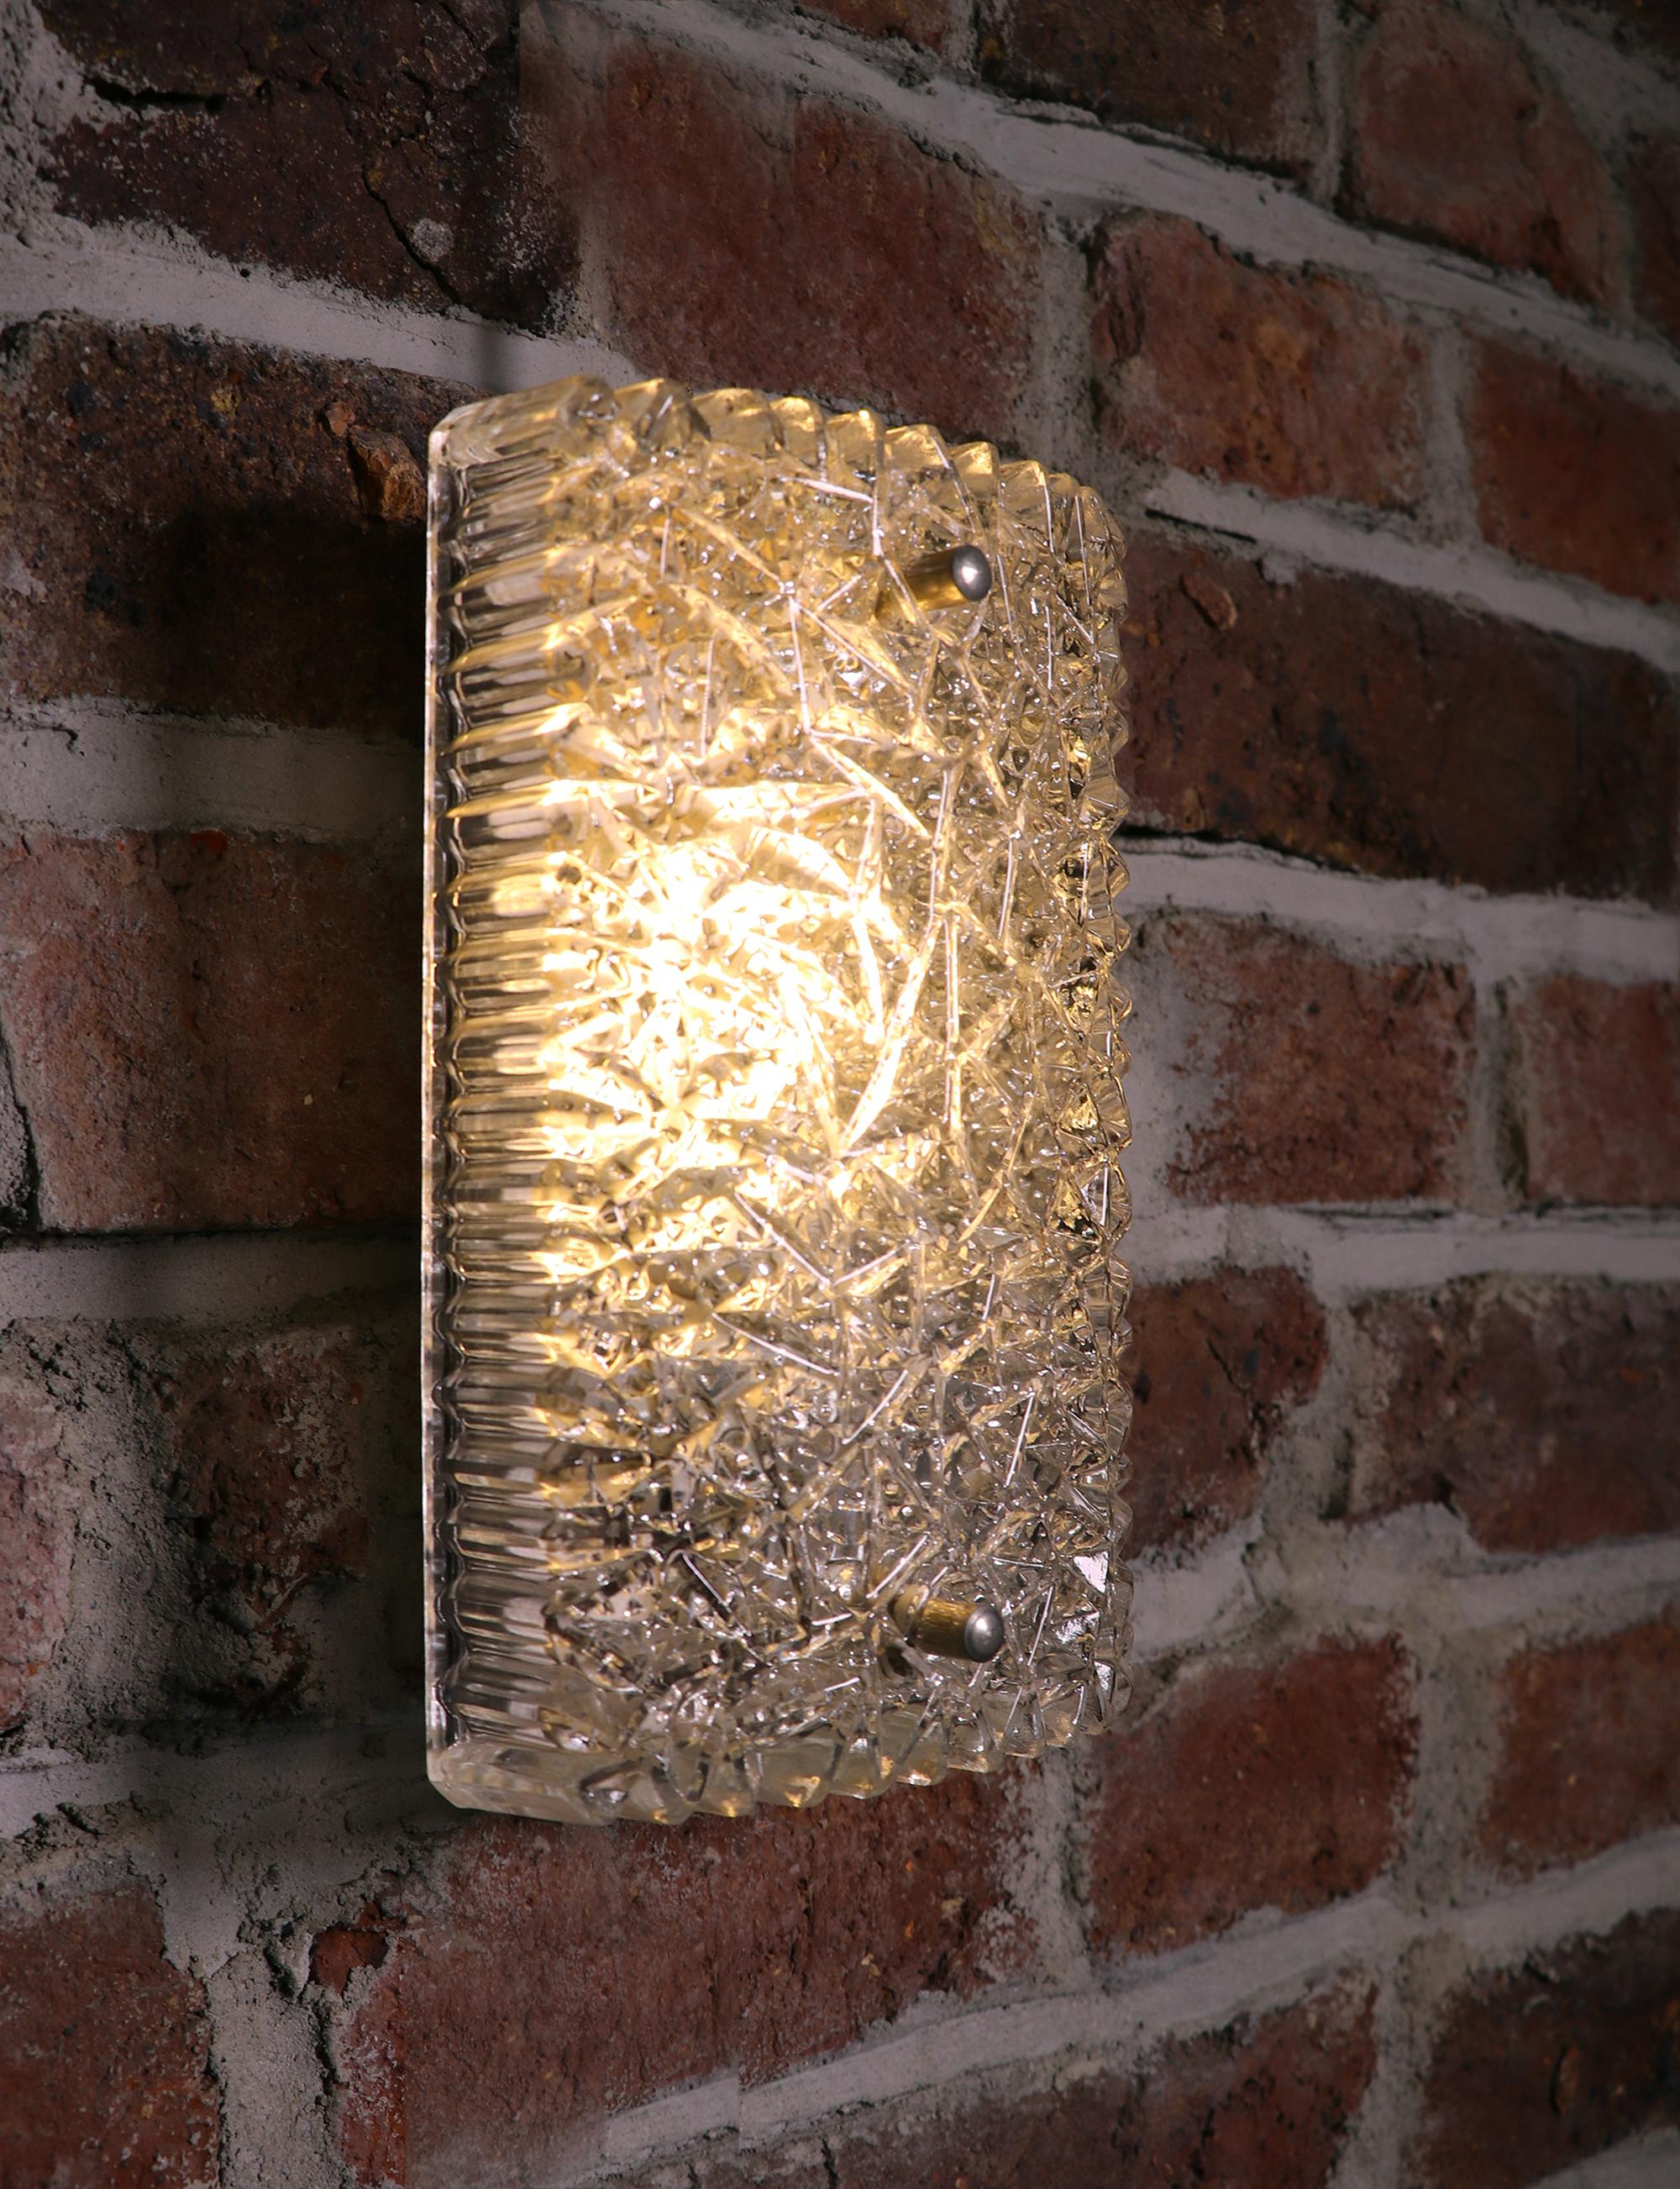 Vintage wall sconce with textured glass on white lacquered frames manufactured by the German maker Hoffmeister Leuchten.
The lamp takes one small Edison bulb.
7 sconces are available. Priced individually.
Measurements: 8.7 x 5 x 3.3 in. / 22 x 13